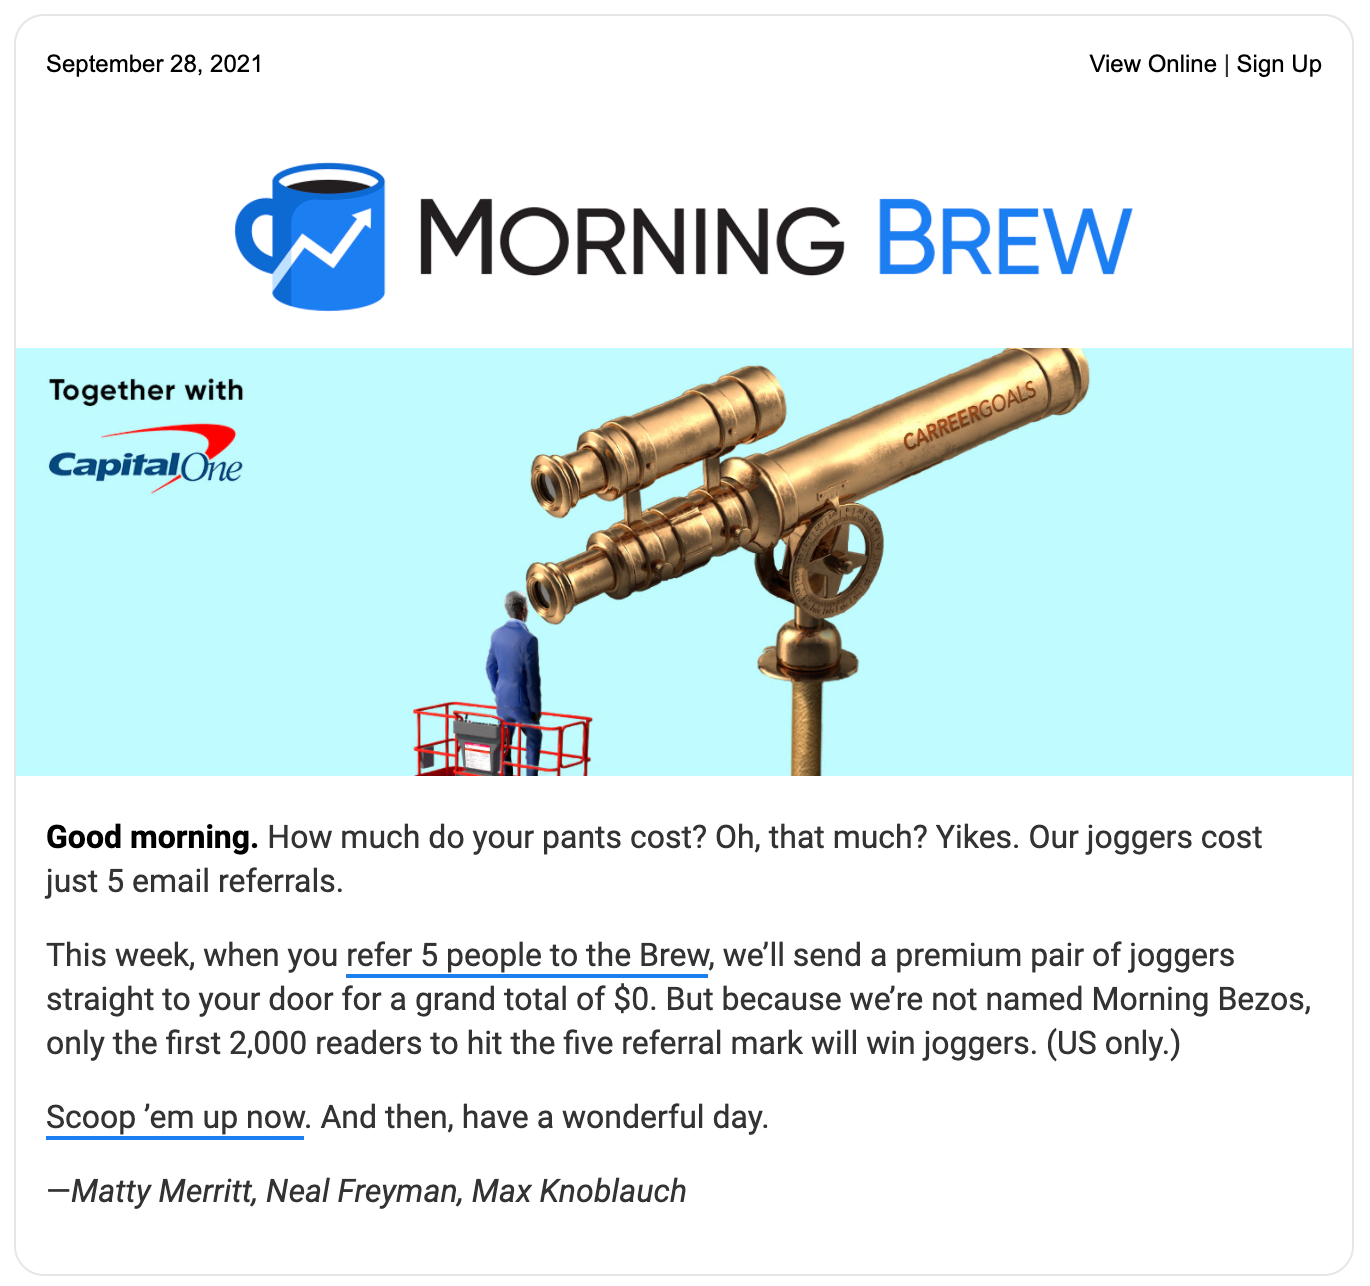 Morning Brew referral email